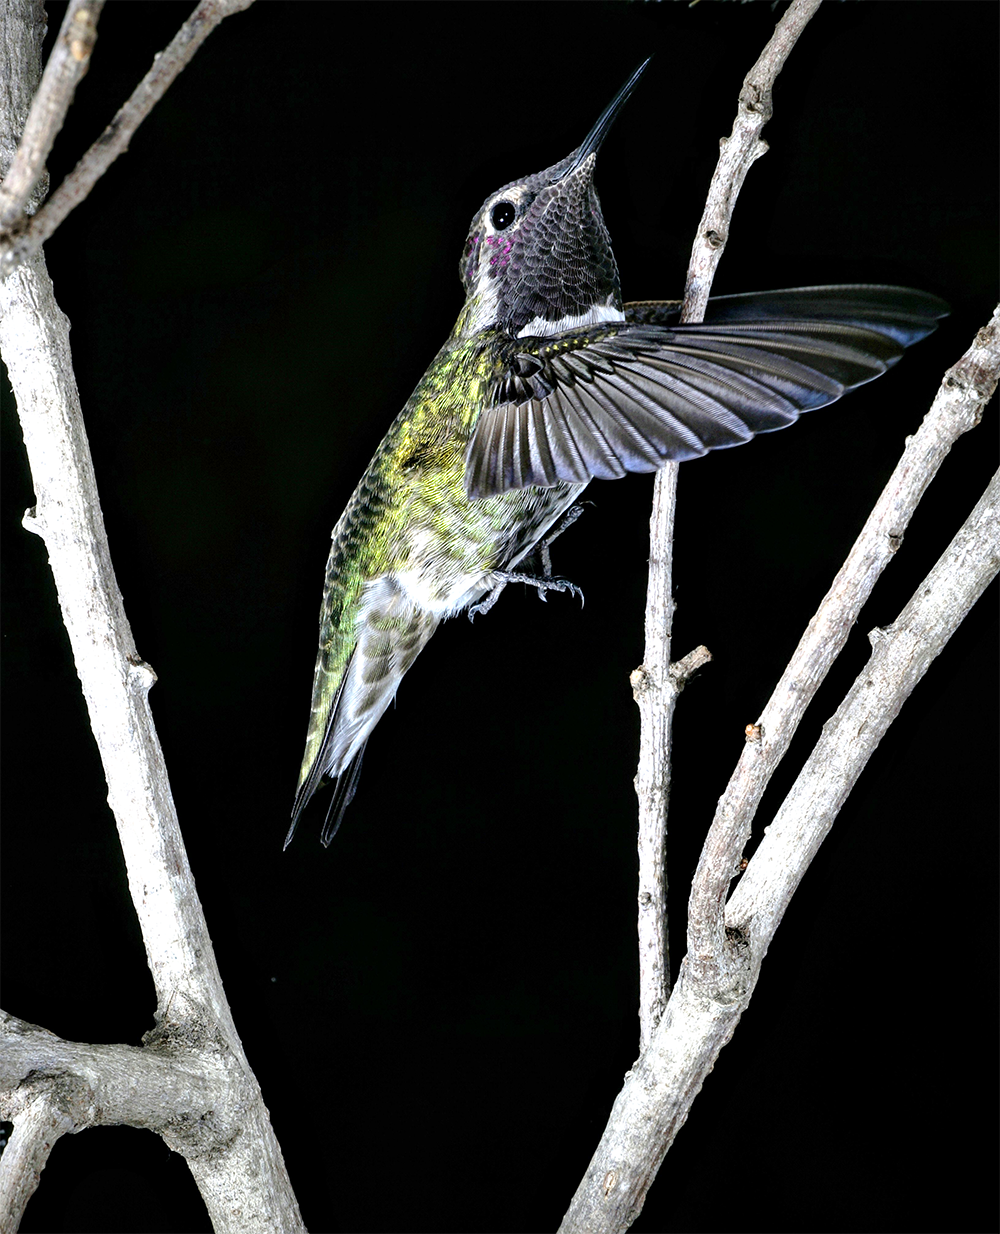 An Anna's hummingbird slips sideways between twigs, an unexpected maneuver that appears unique to hummingbirds.